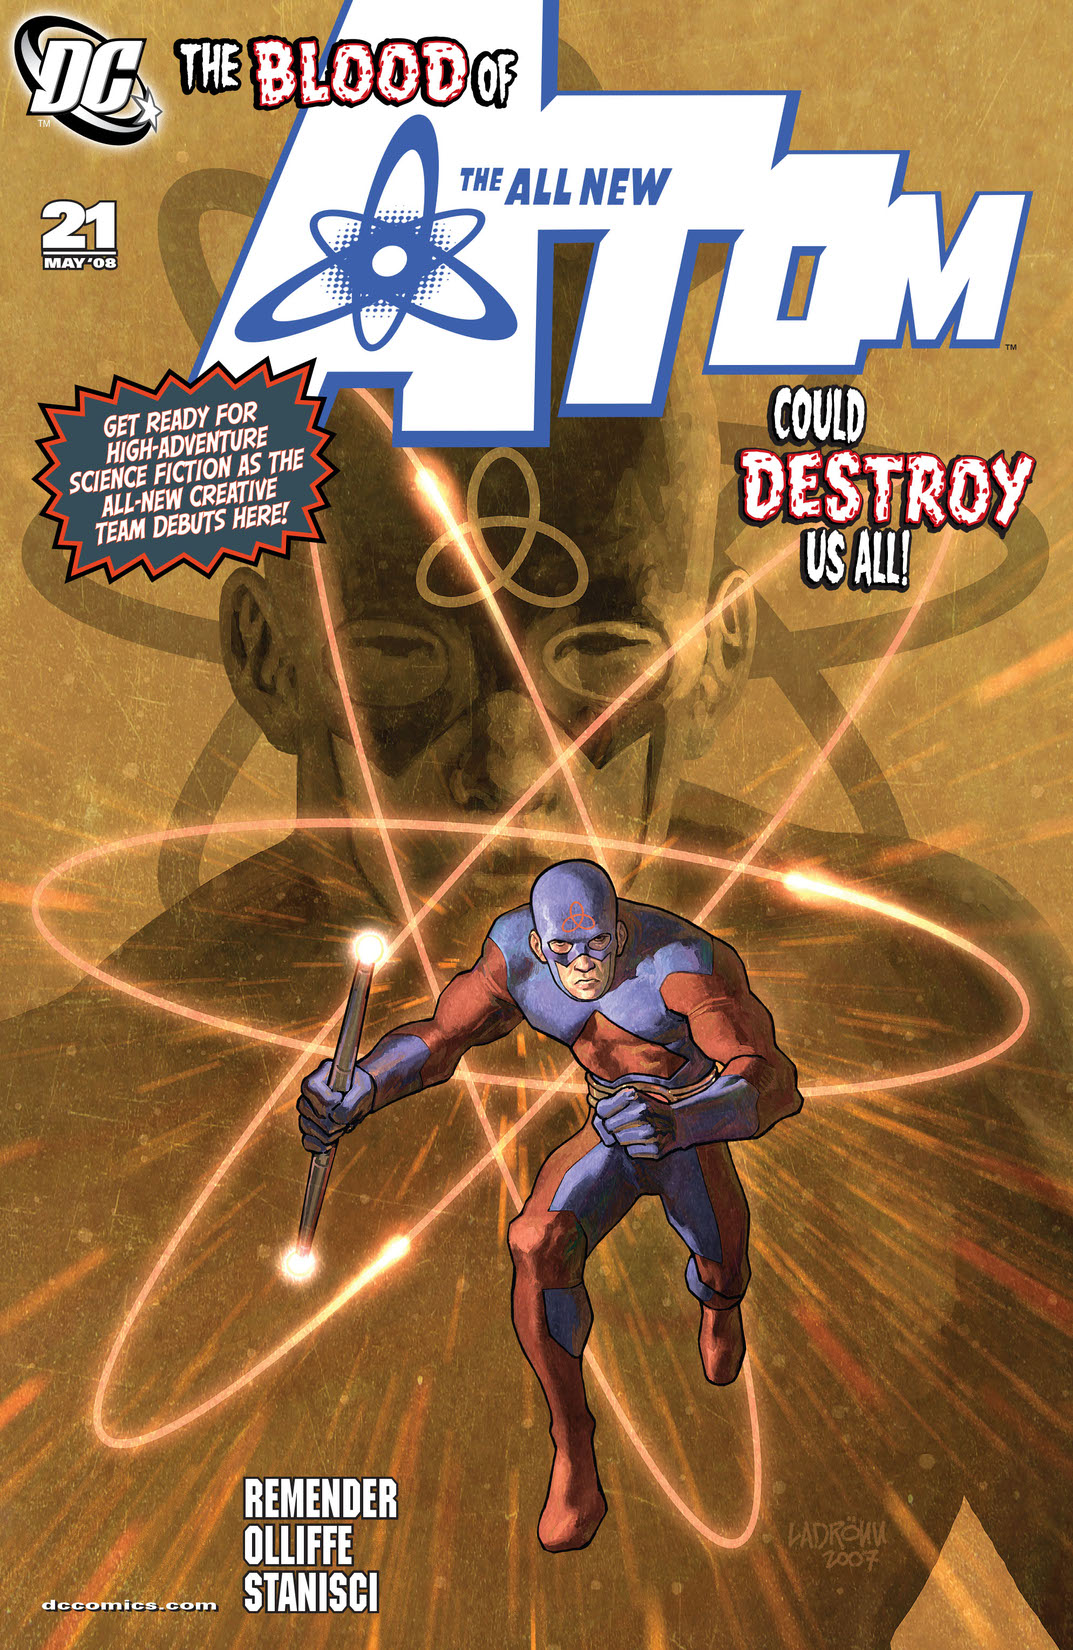 The All New Atom #21 preview images